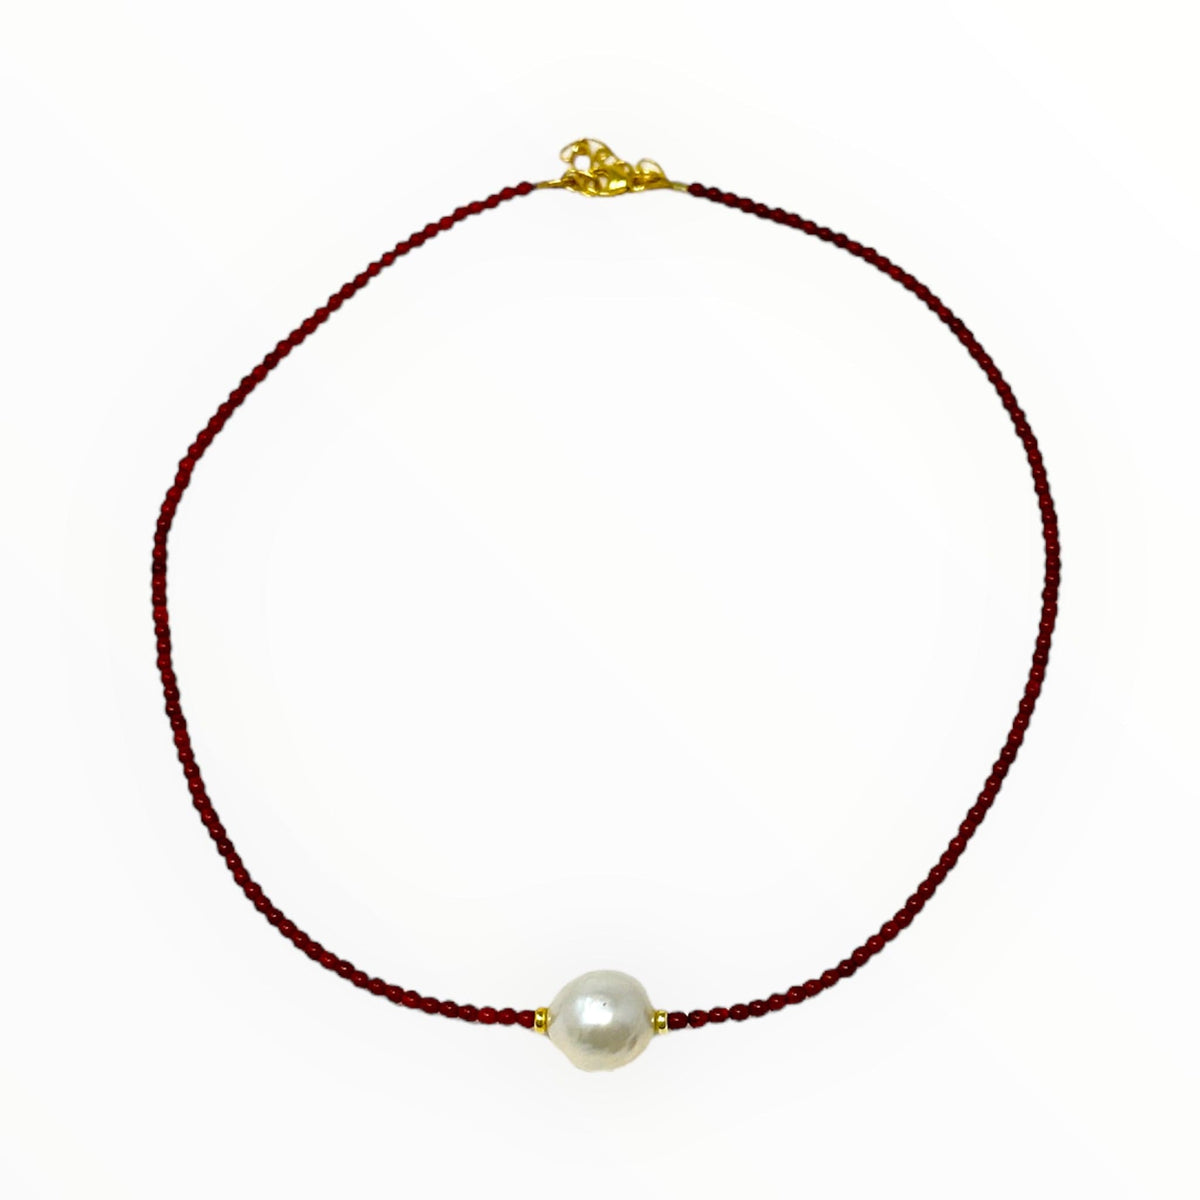 Red Agate and Pearl Necklace - Boho Beaded Beaut